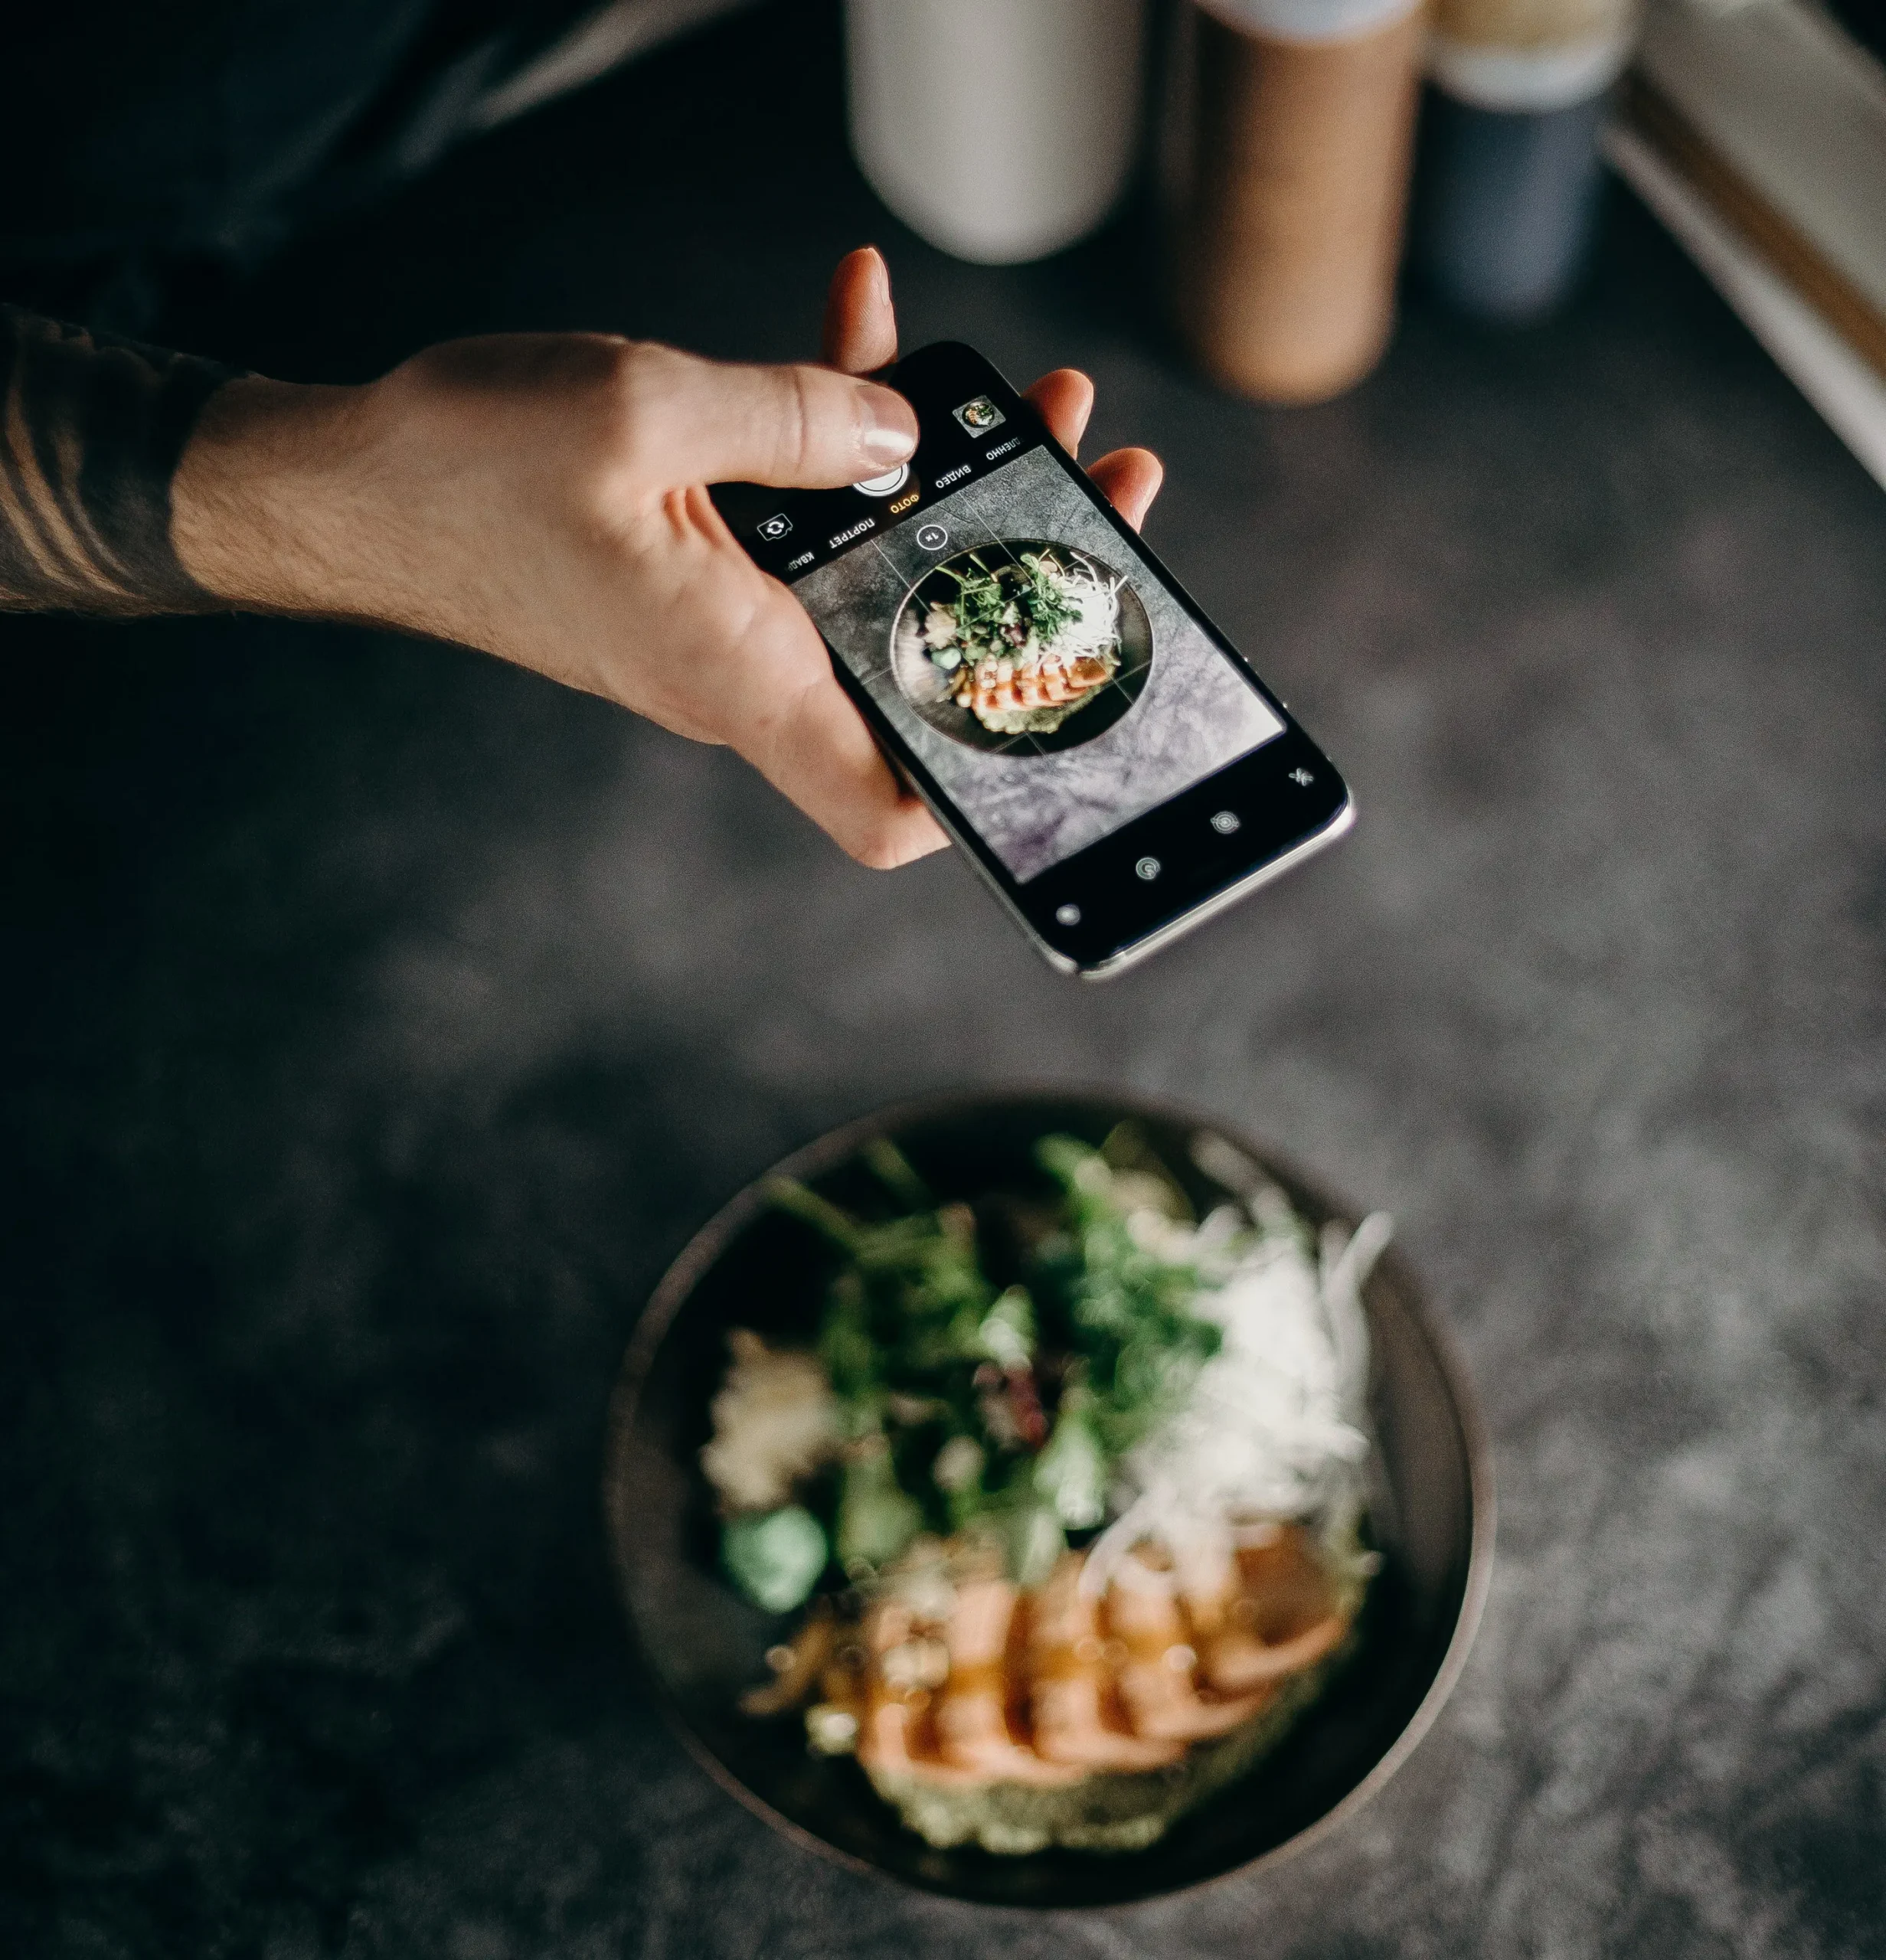 Food photography with smartphone by holding one hand